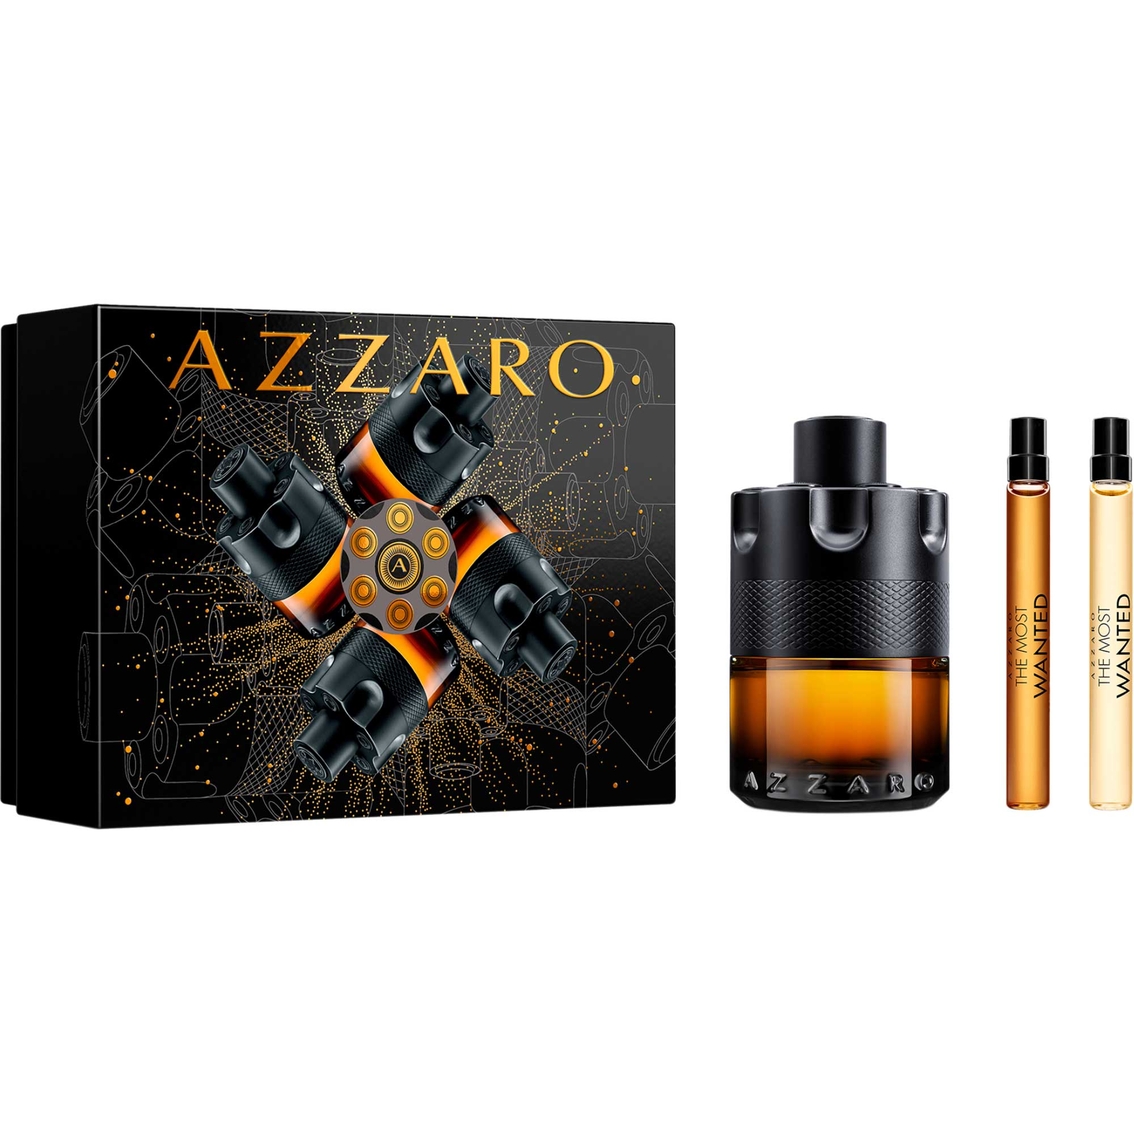 Azzaro The Most Wanted Parfum 3 pc. Gift Set - Image 1 of 3